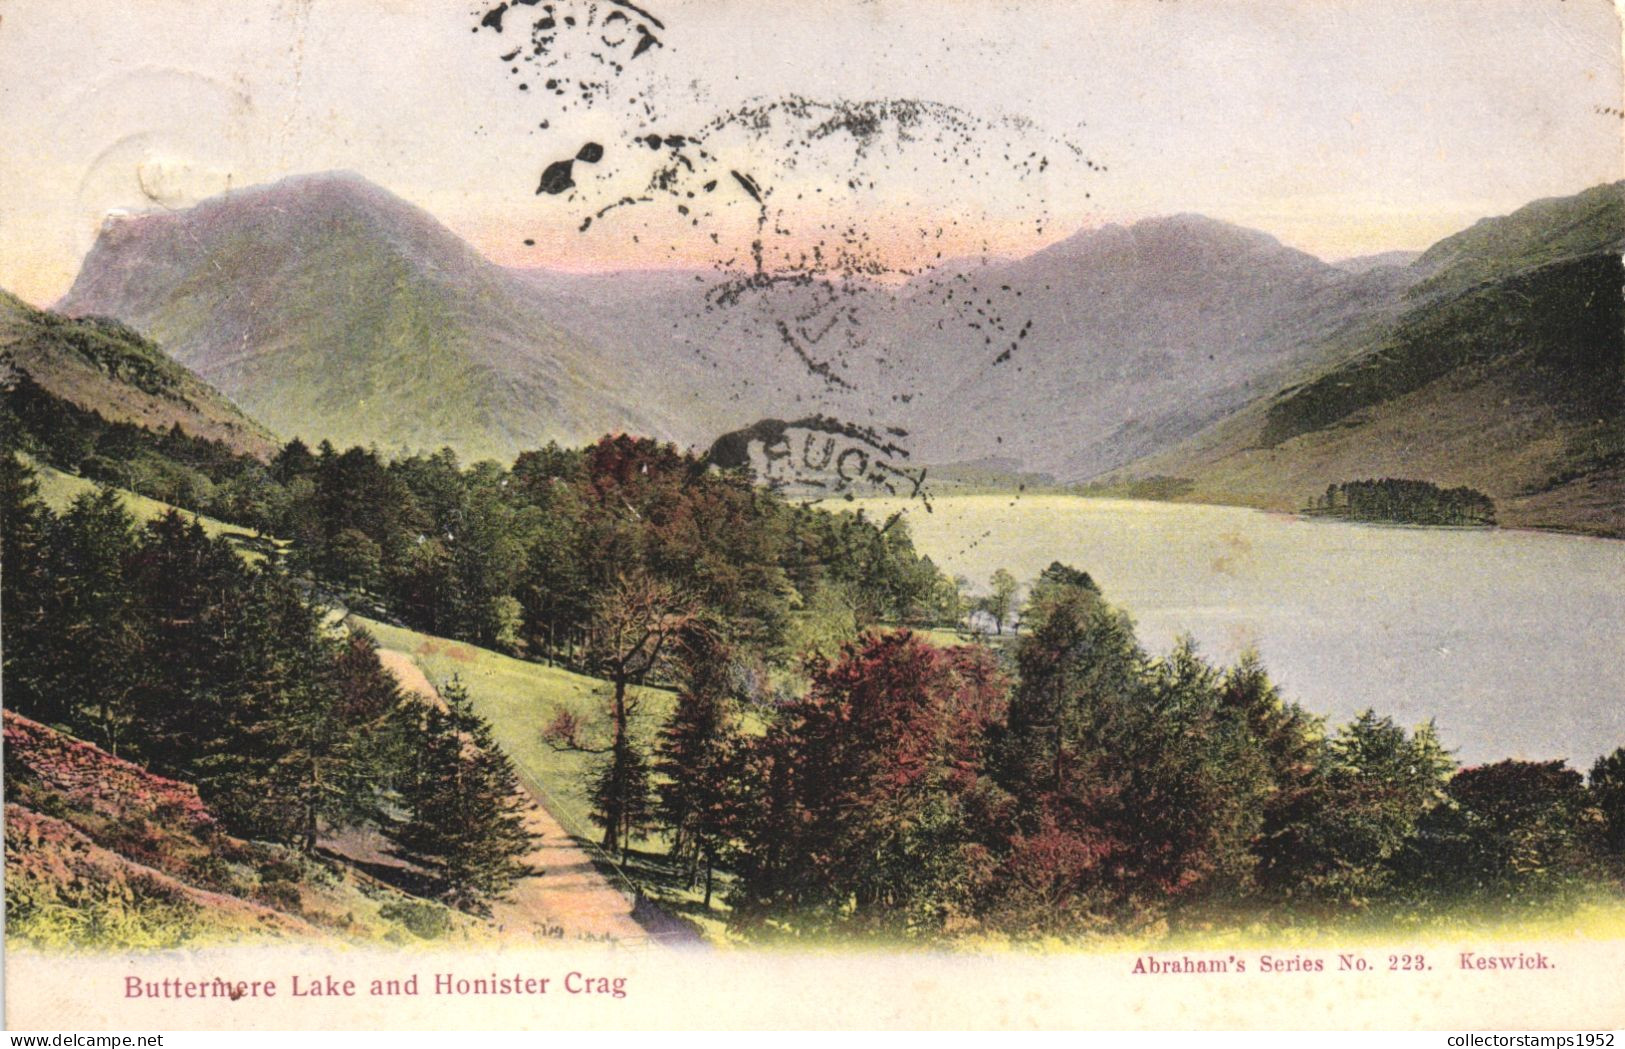 BUTTERMERE, LAKE, HONISTER CRAG, ABRAHAM'S SERIES NO. 223, KESWICK, UNITED KINGDOM - Buttermere